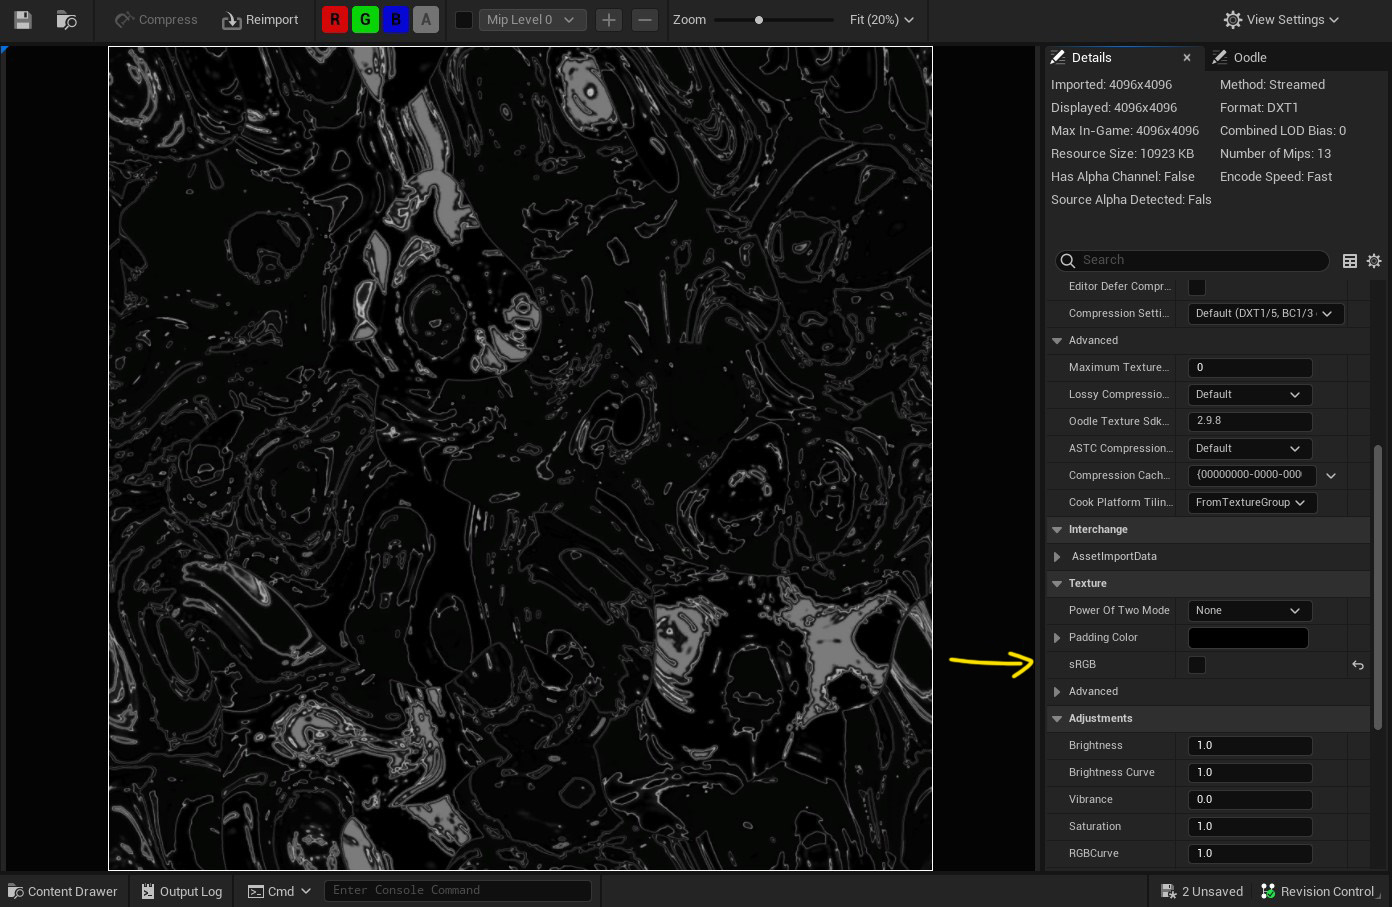 Another Unreal 5 texture inspect window, but this time around looking at the black and white liquid spill. If you scroll down in the settings to the right, you will find an sRGB tick box. Turn that off. The image here has an arrow pointing it.